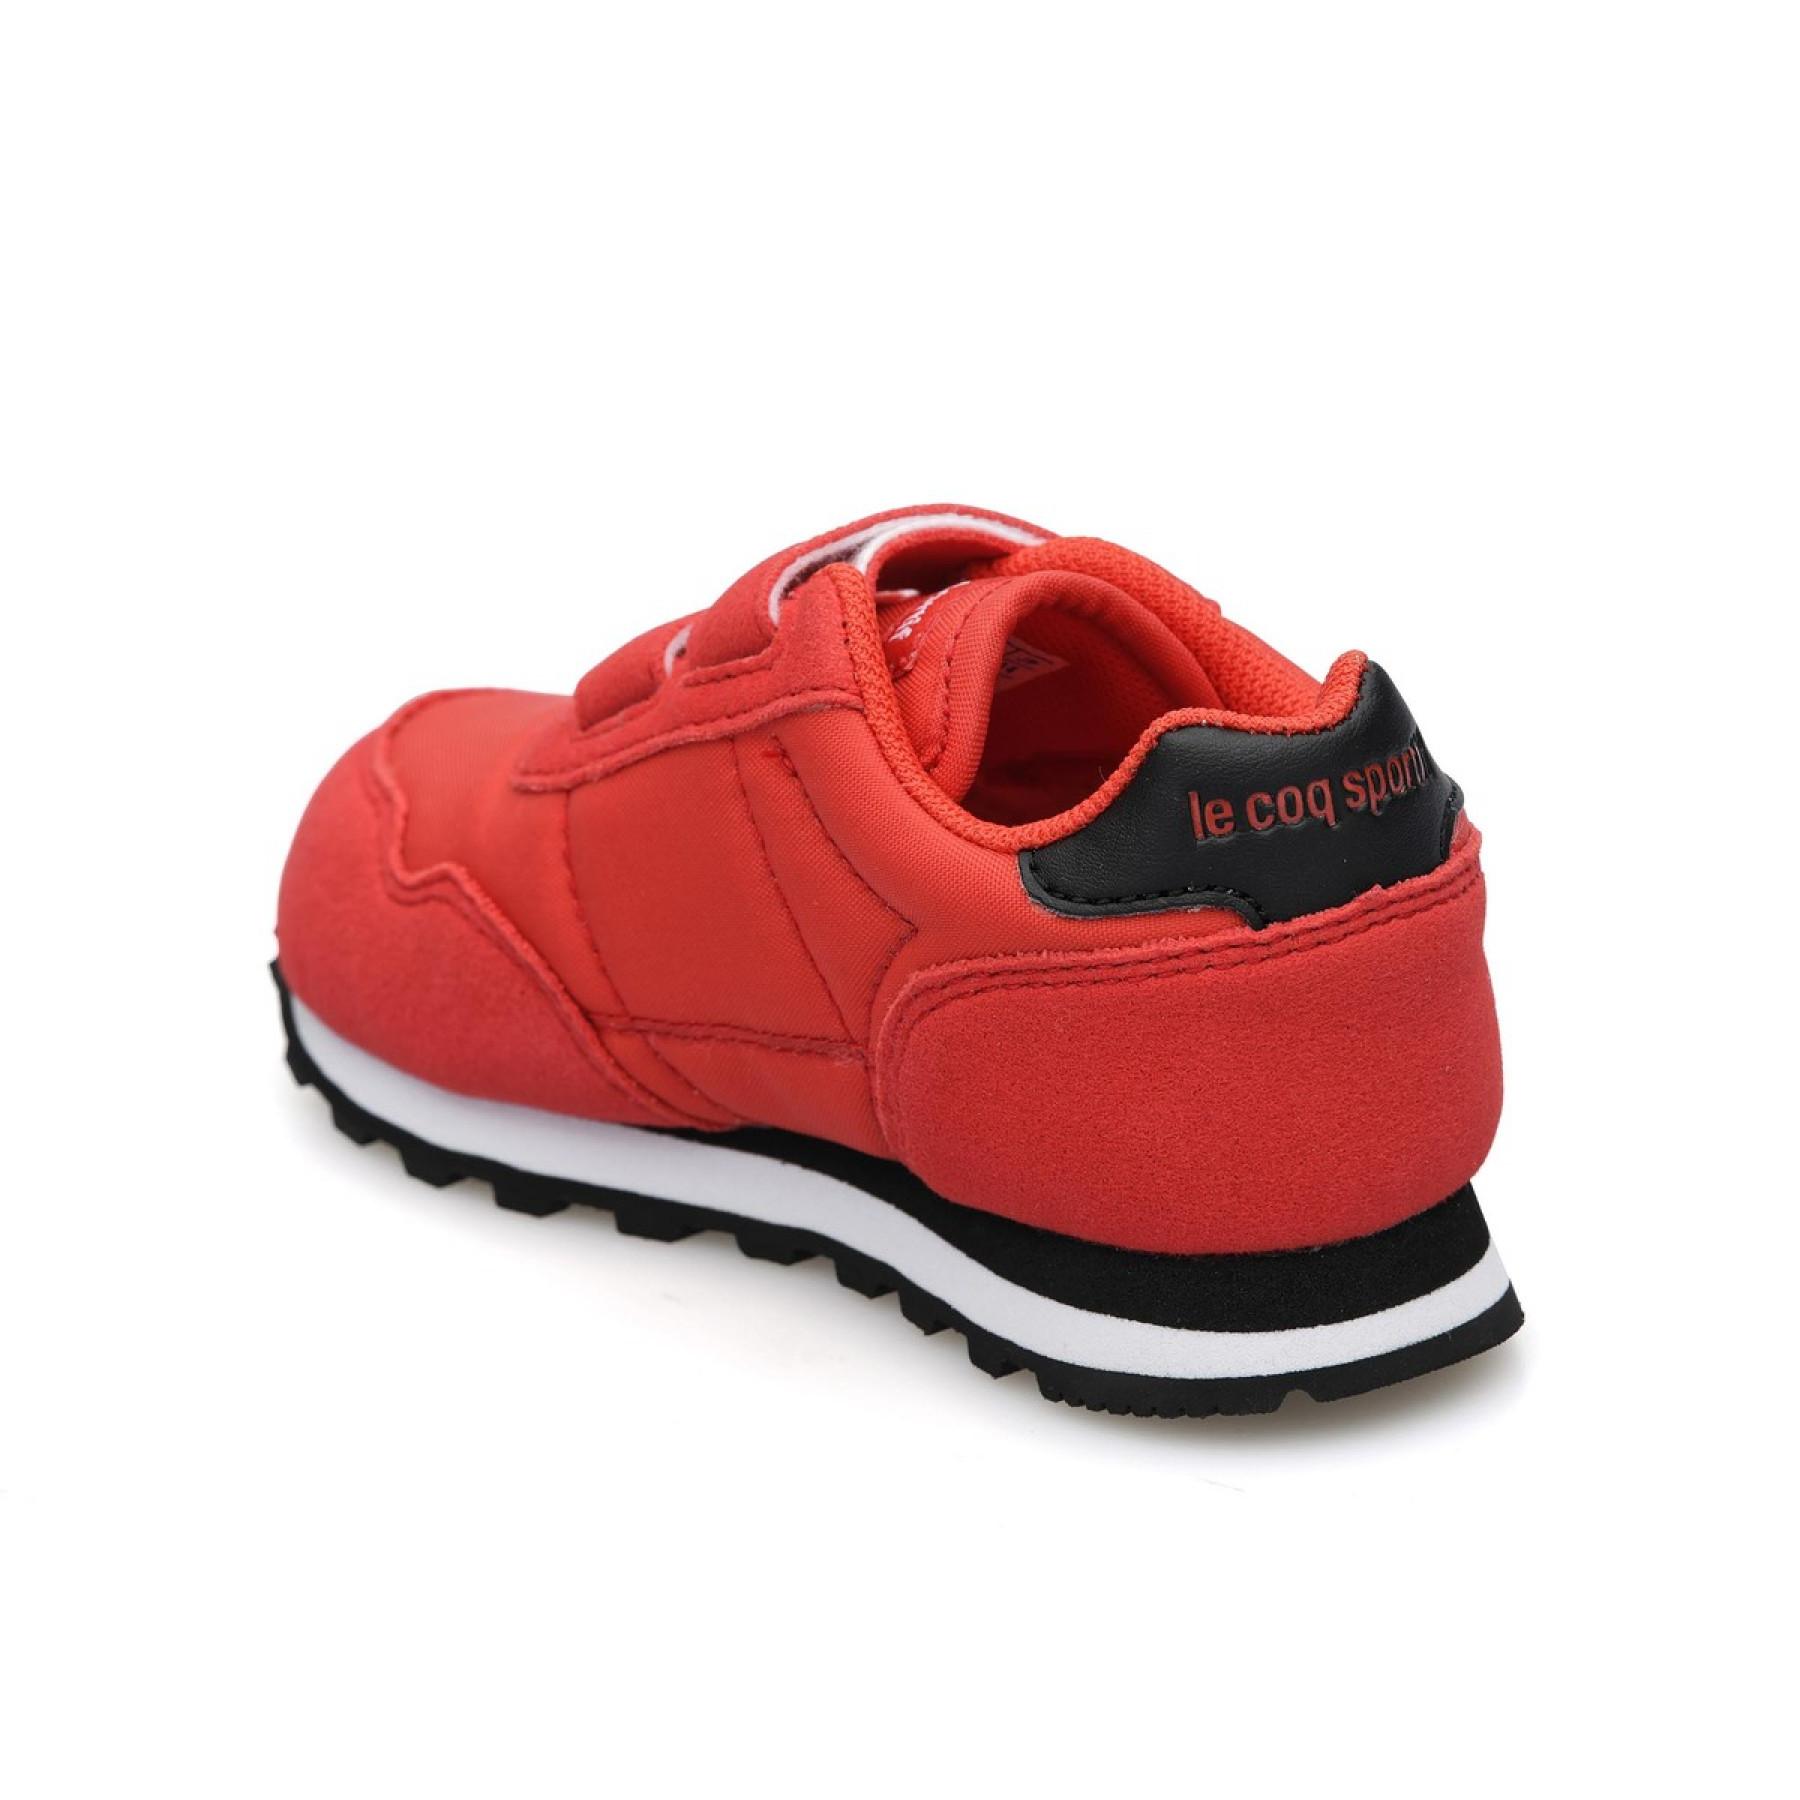 Children's shoes Le Coq Sportif Astra inf